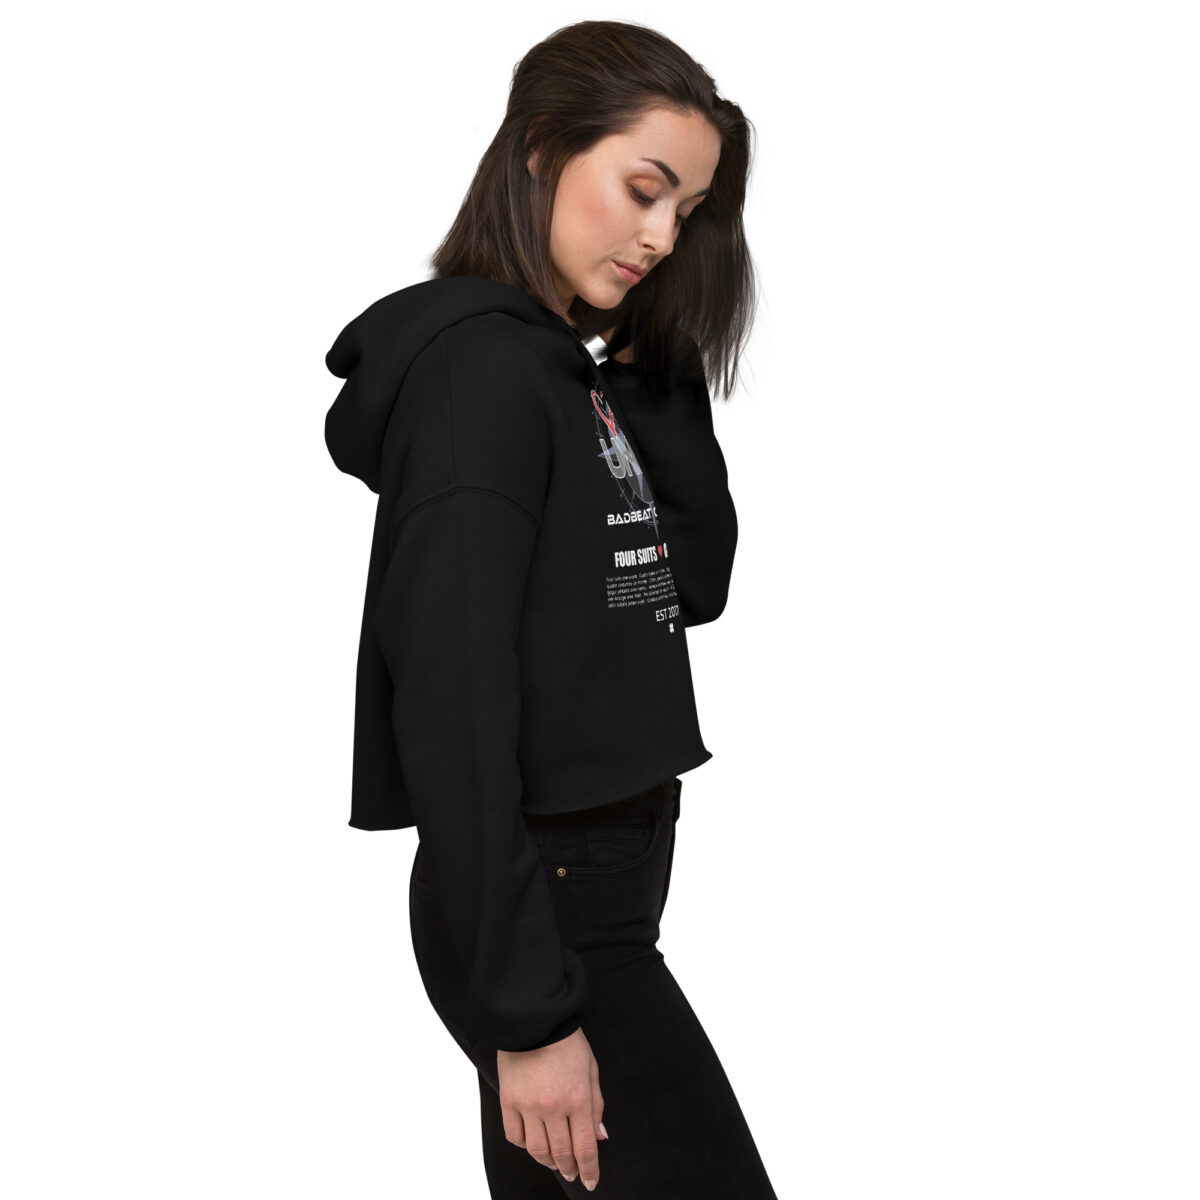 womens-cropped-hoodie-black-right-front-6414875ca3b8a.jpg